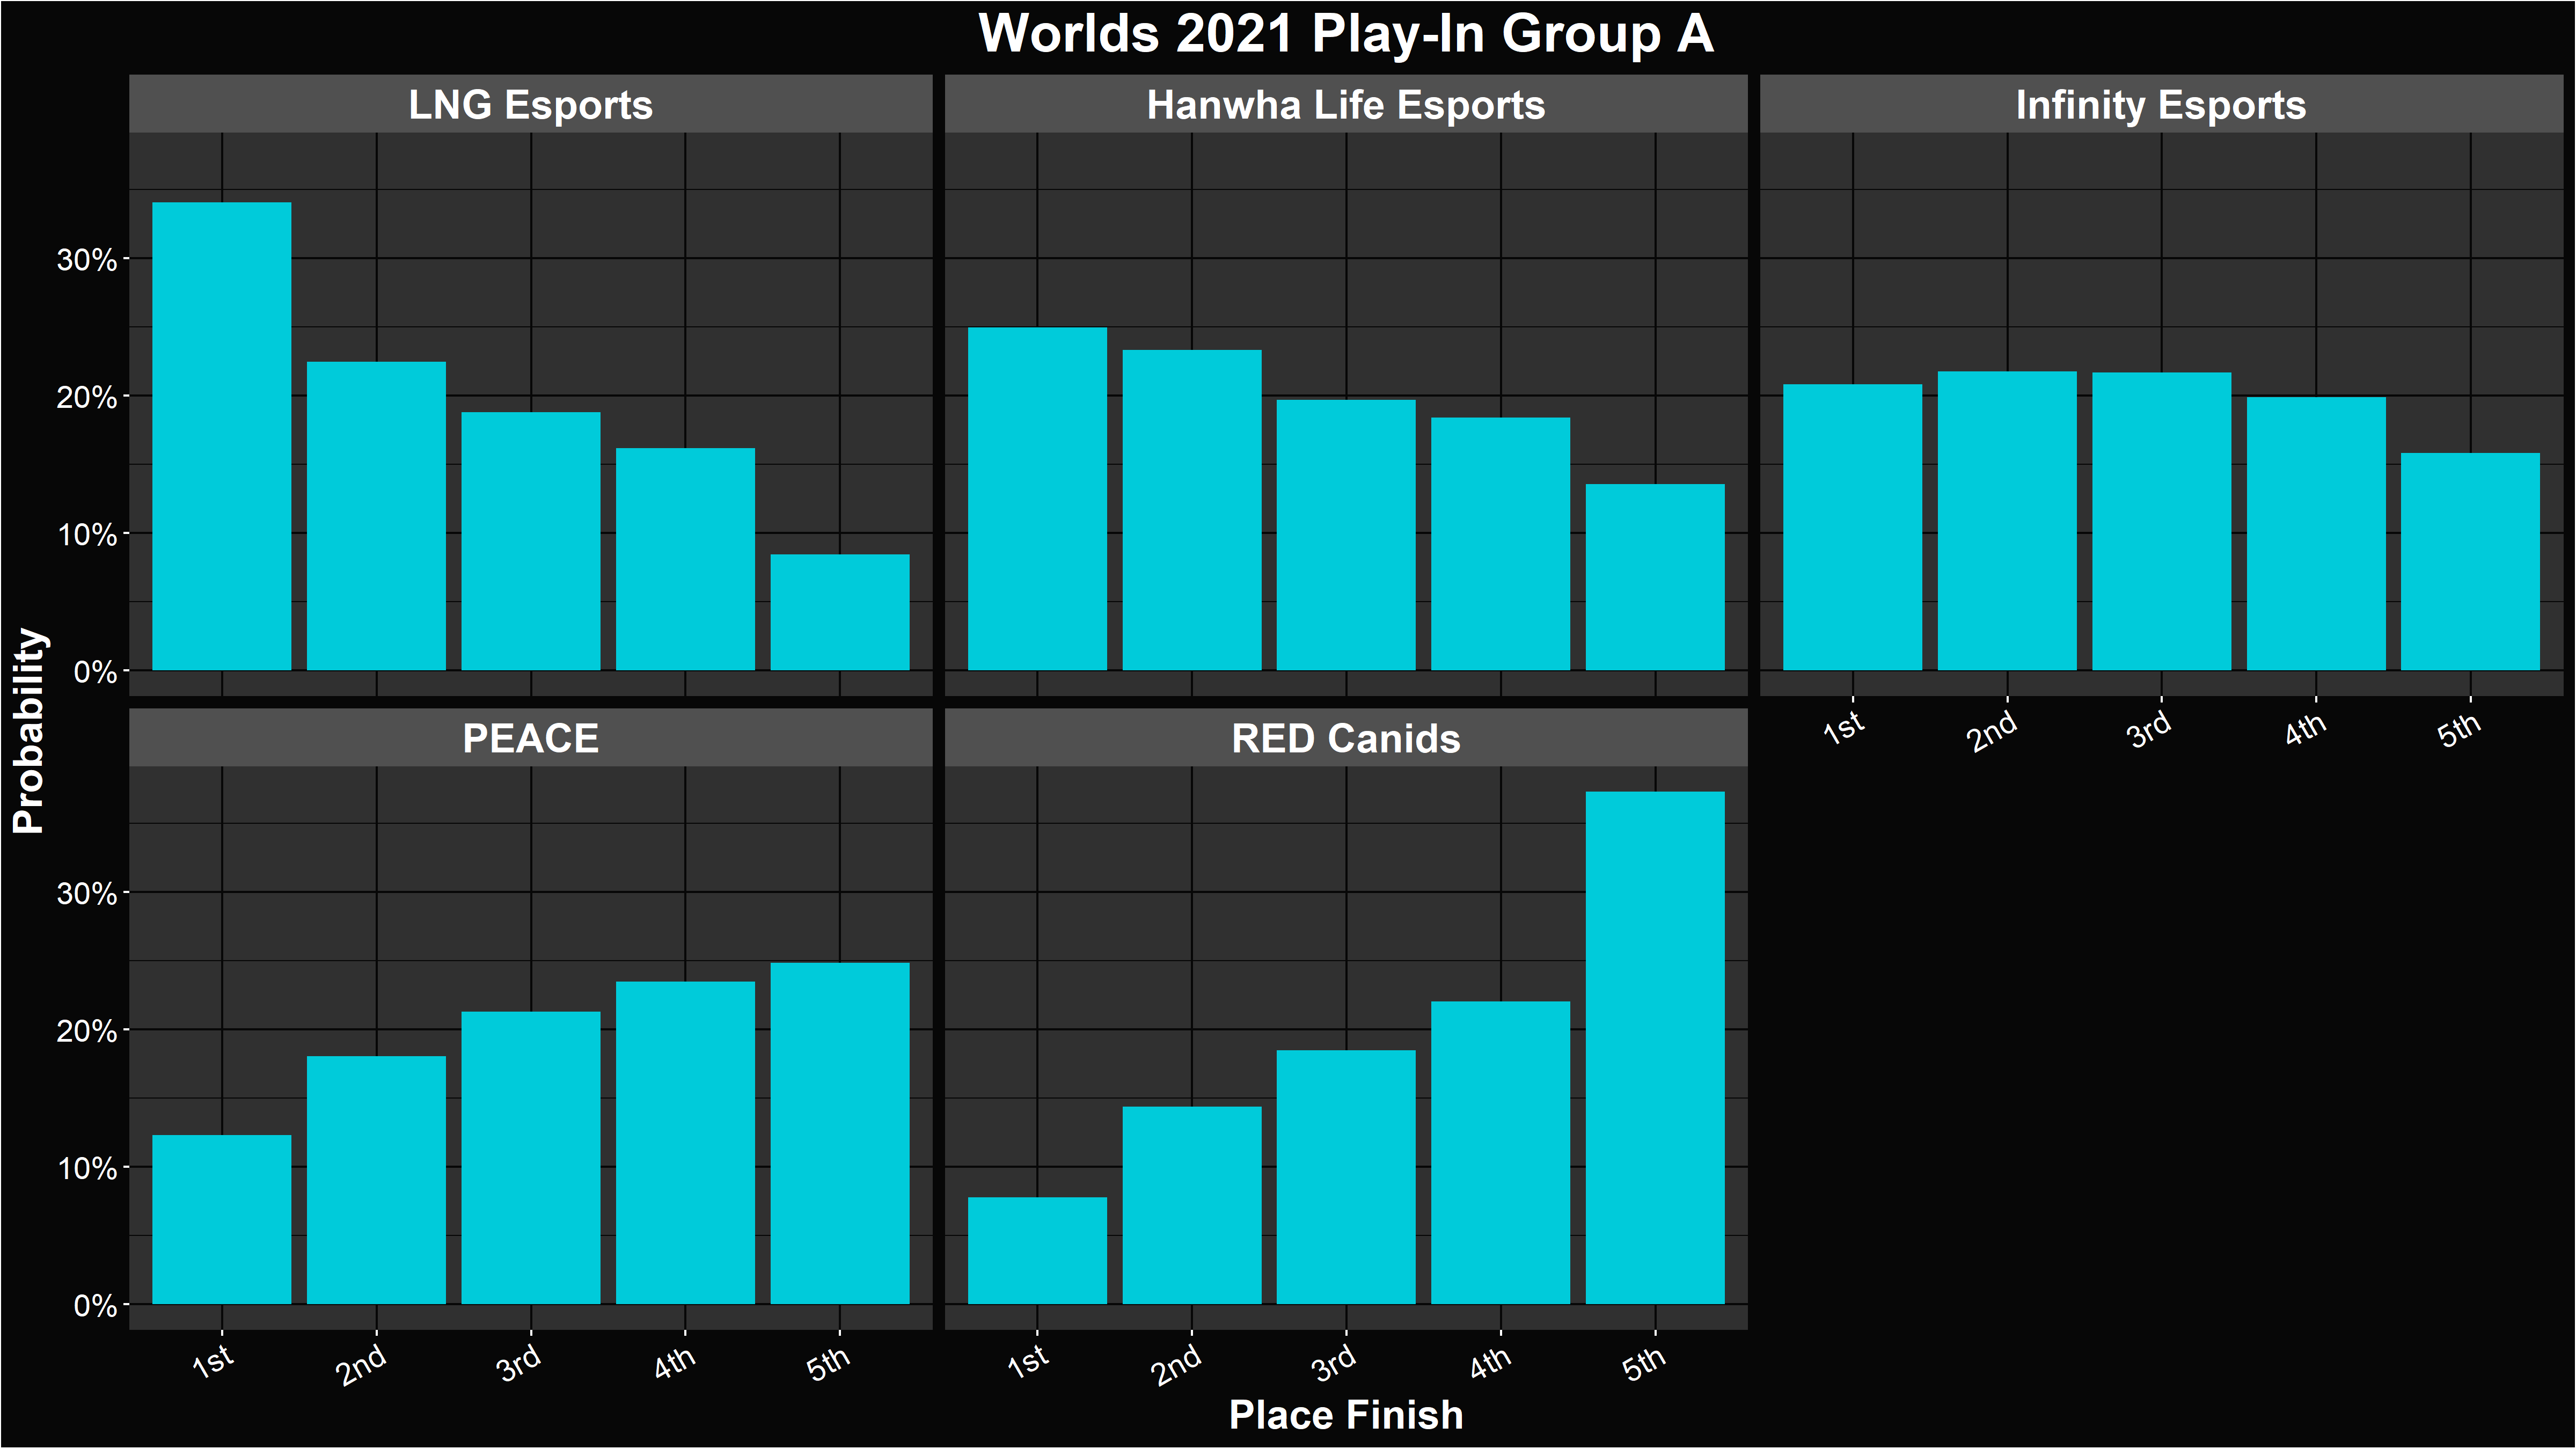 LoL Worlds 2021 Play-In Group A Placement Distributions